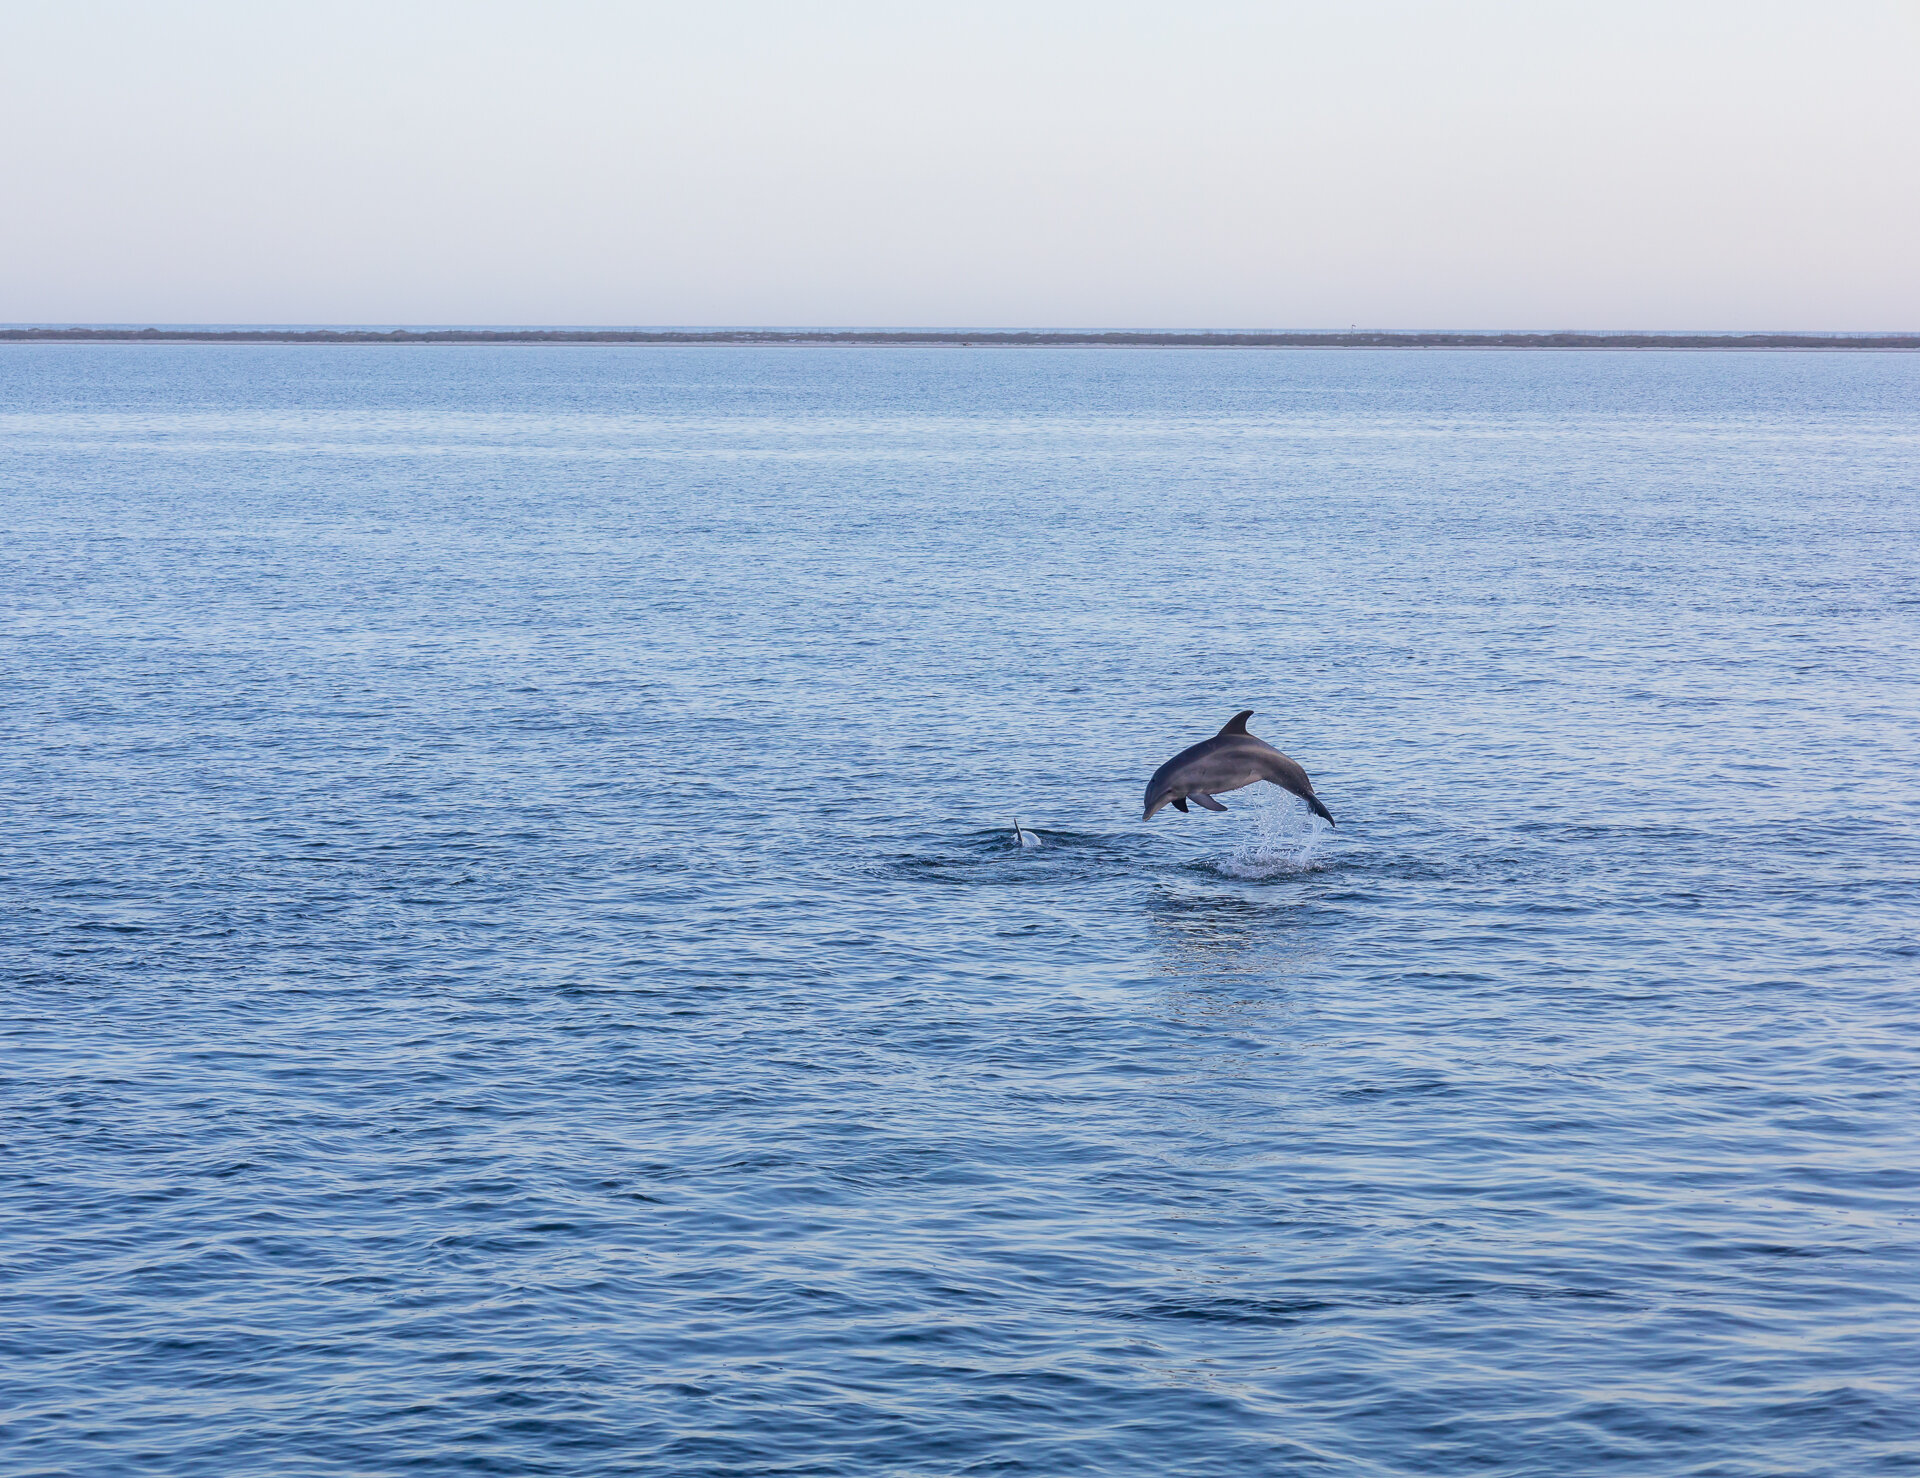 Planning your spring break trip to Pensacola Beach? Plan to bring the family out for an adventure with us. 🐬We start cruising again in March and you can book your reservation in advance at the 🔗 link in our bio.

#PremierDolphinCruise #PensacolaBea